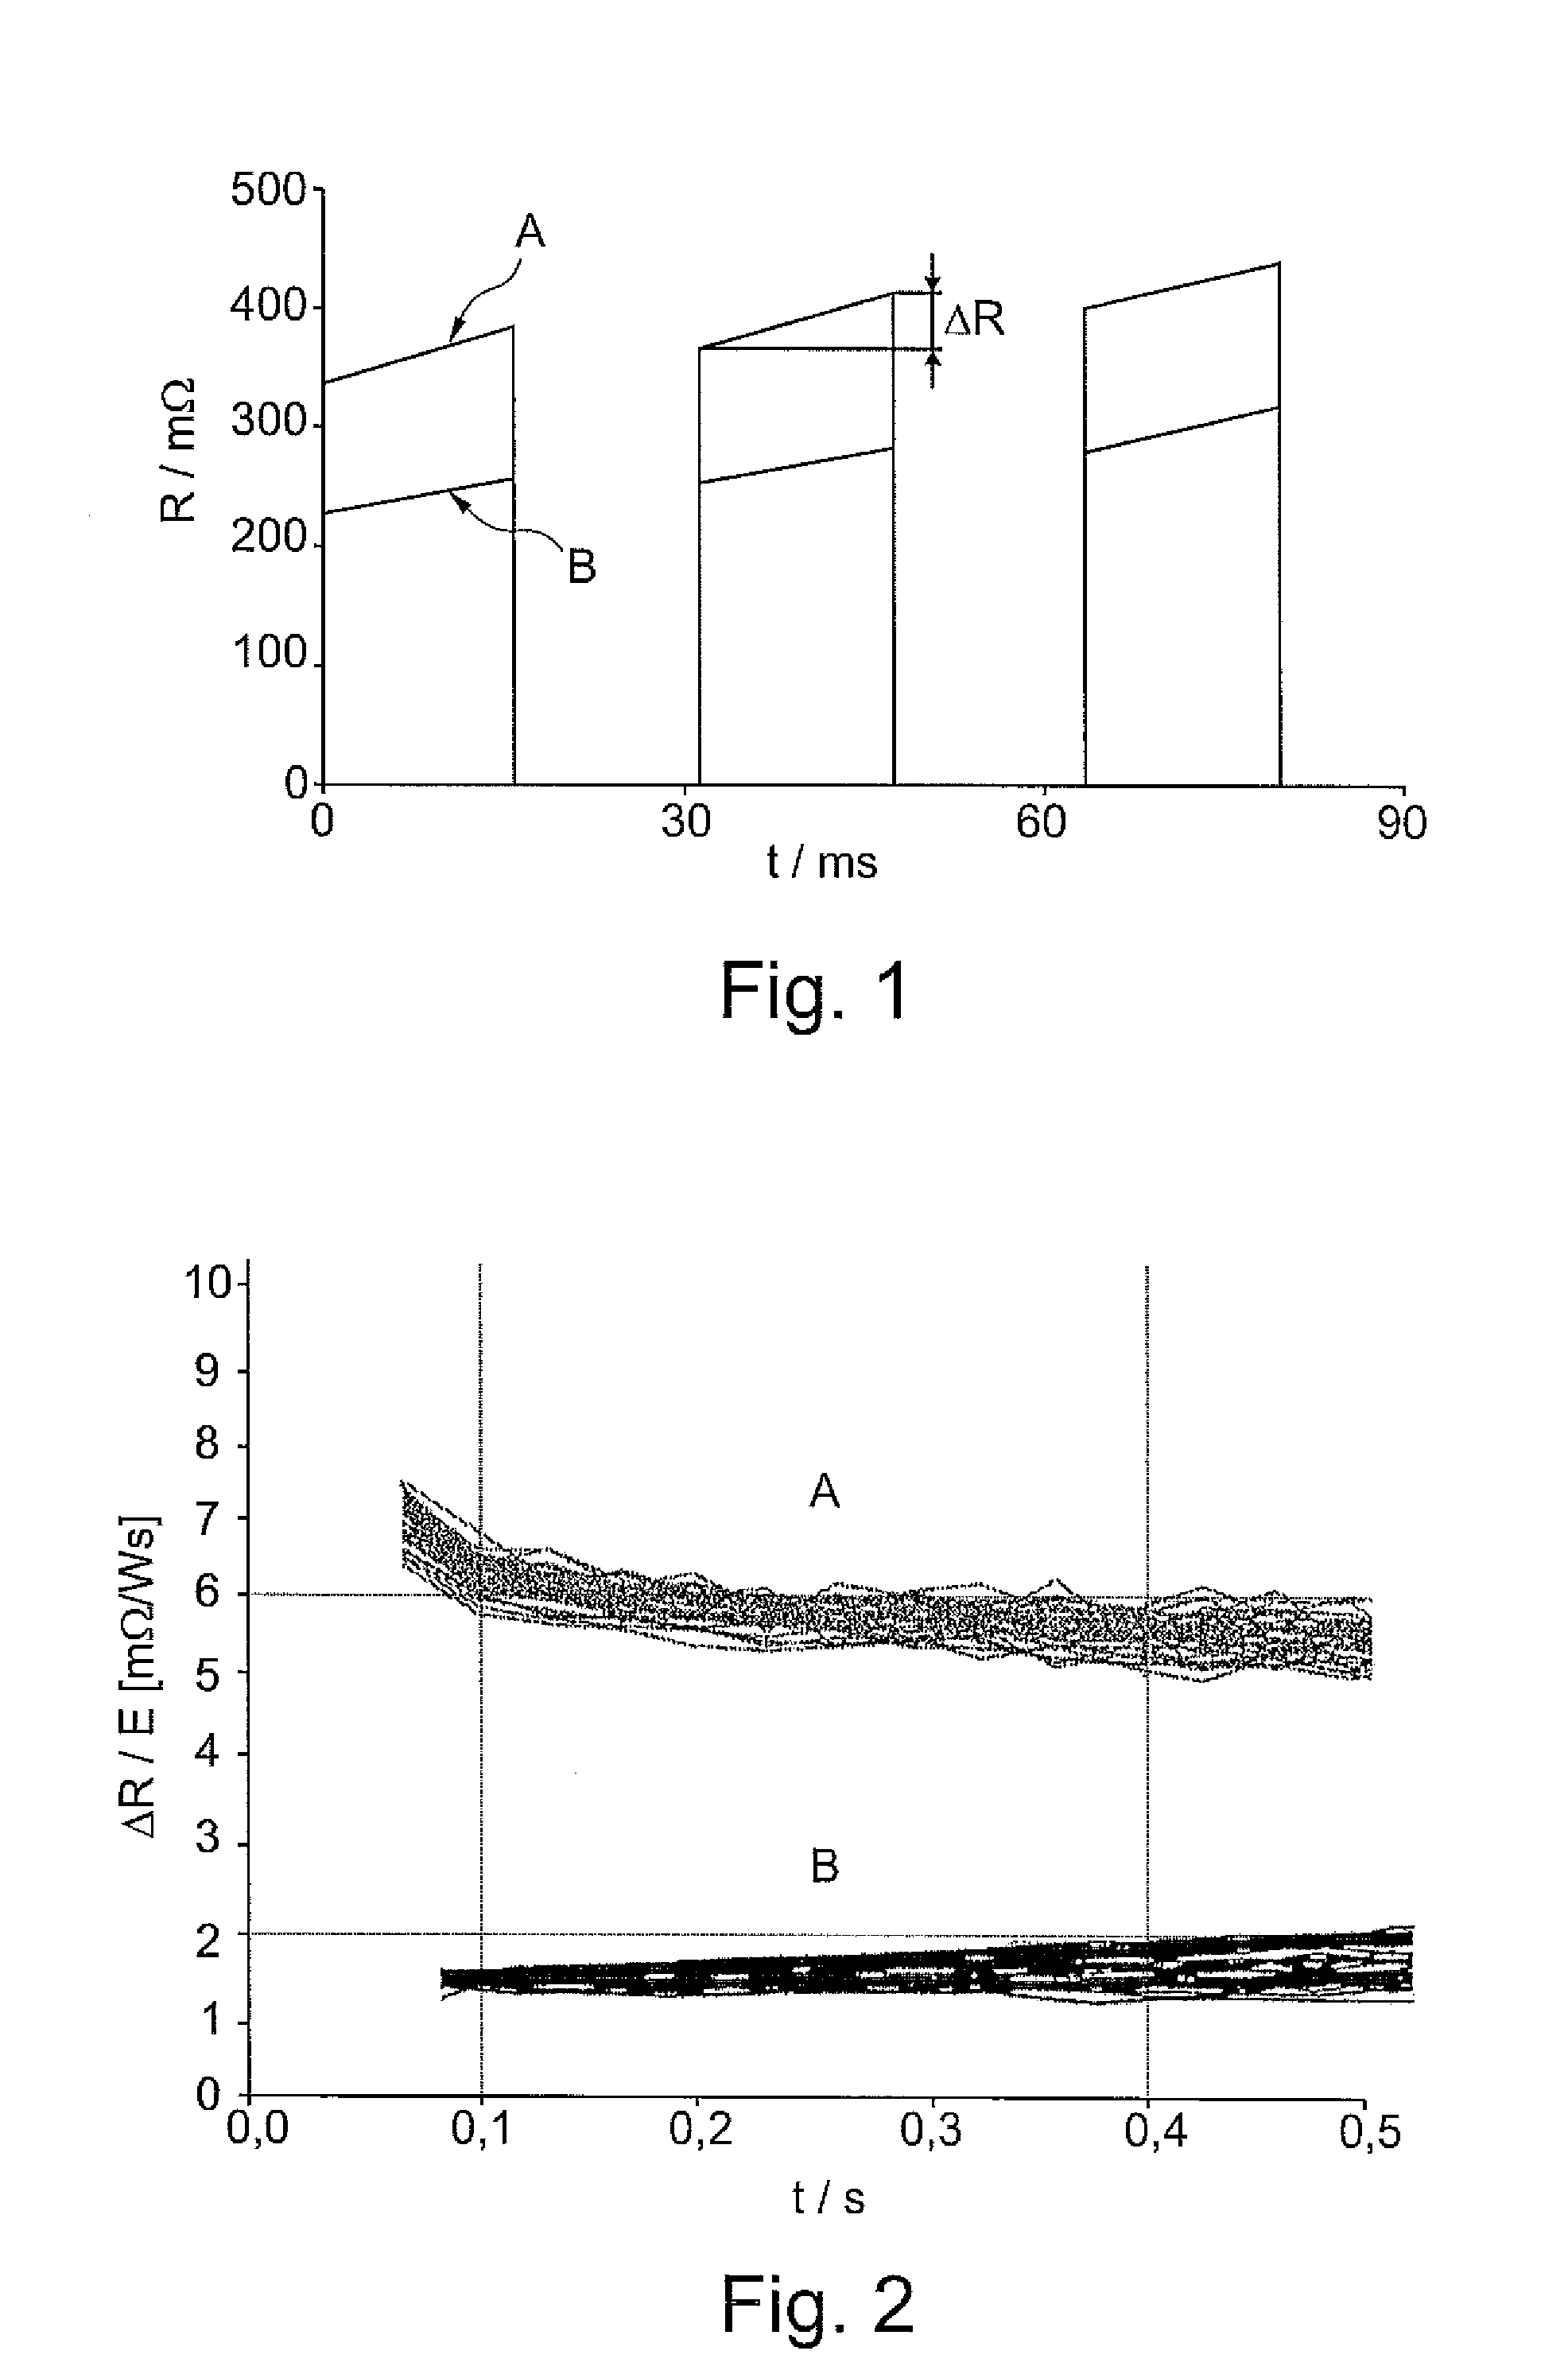 Method for Determining the Heating Characteristic of a Glow Plug